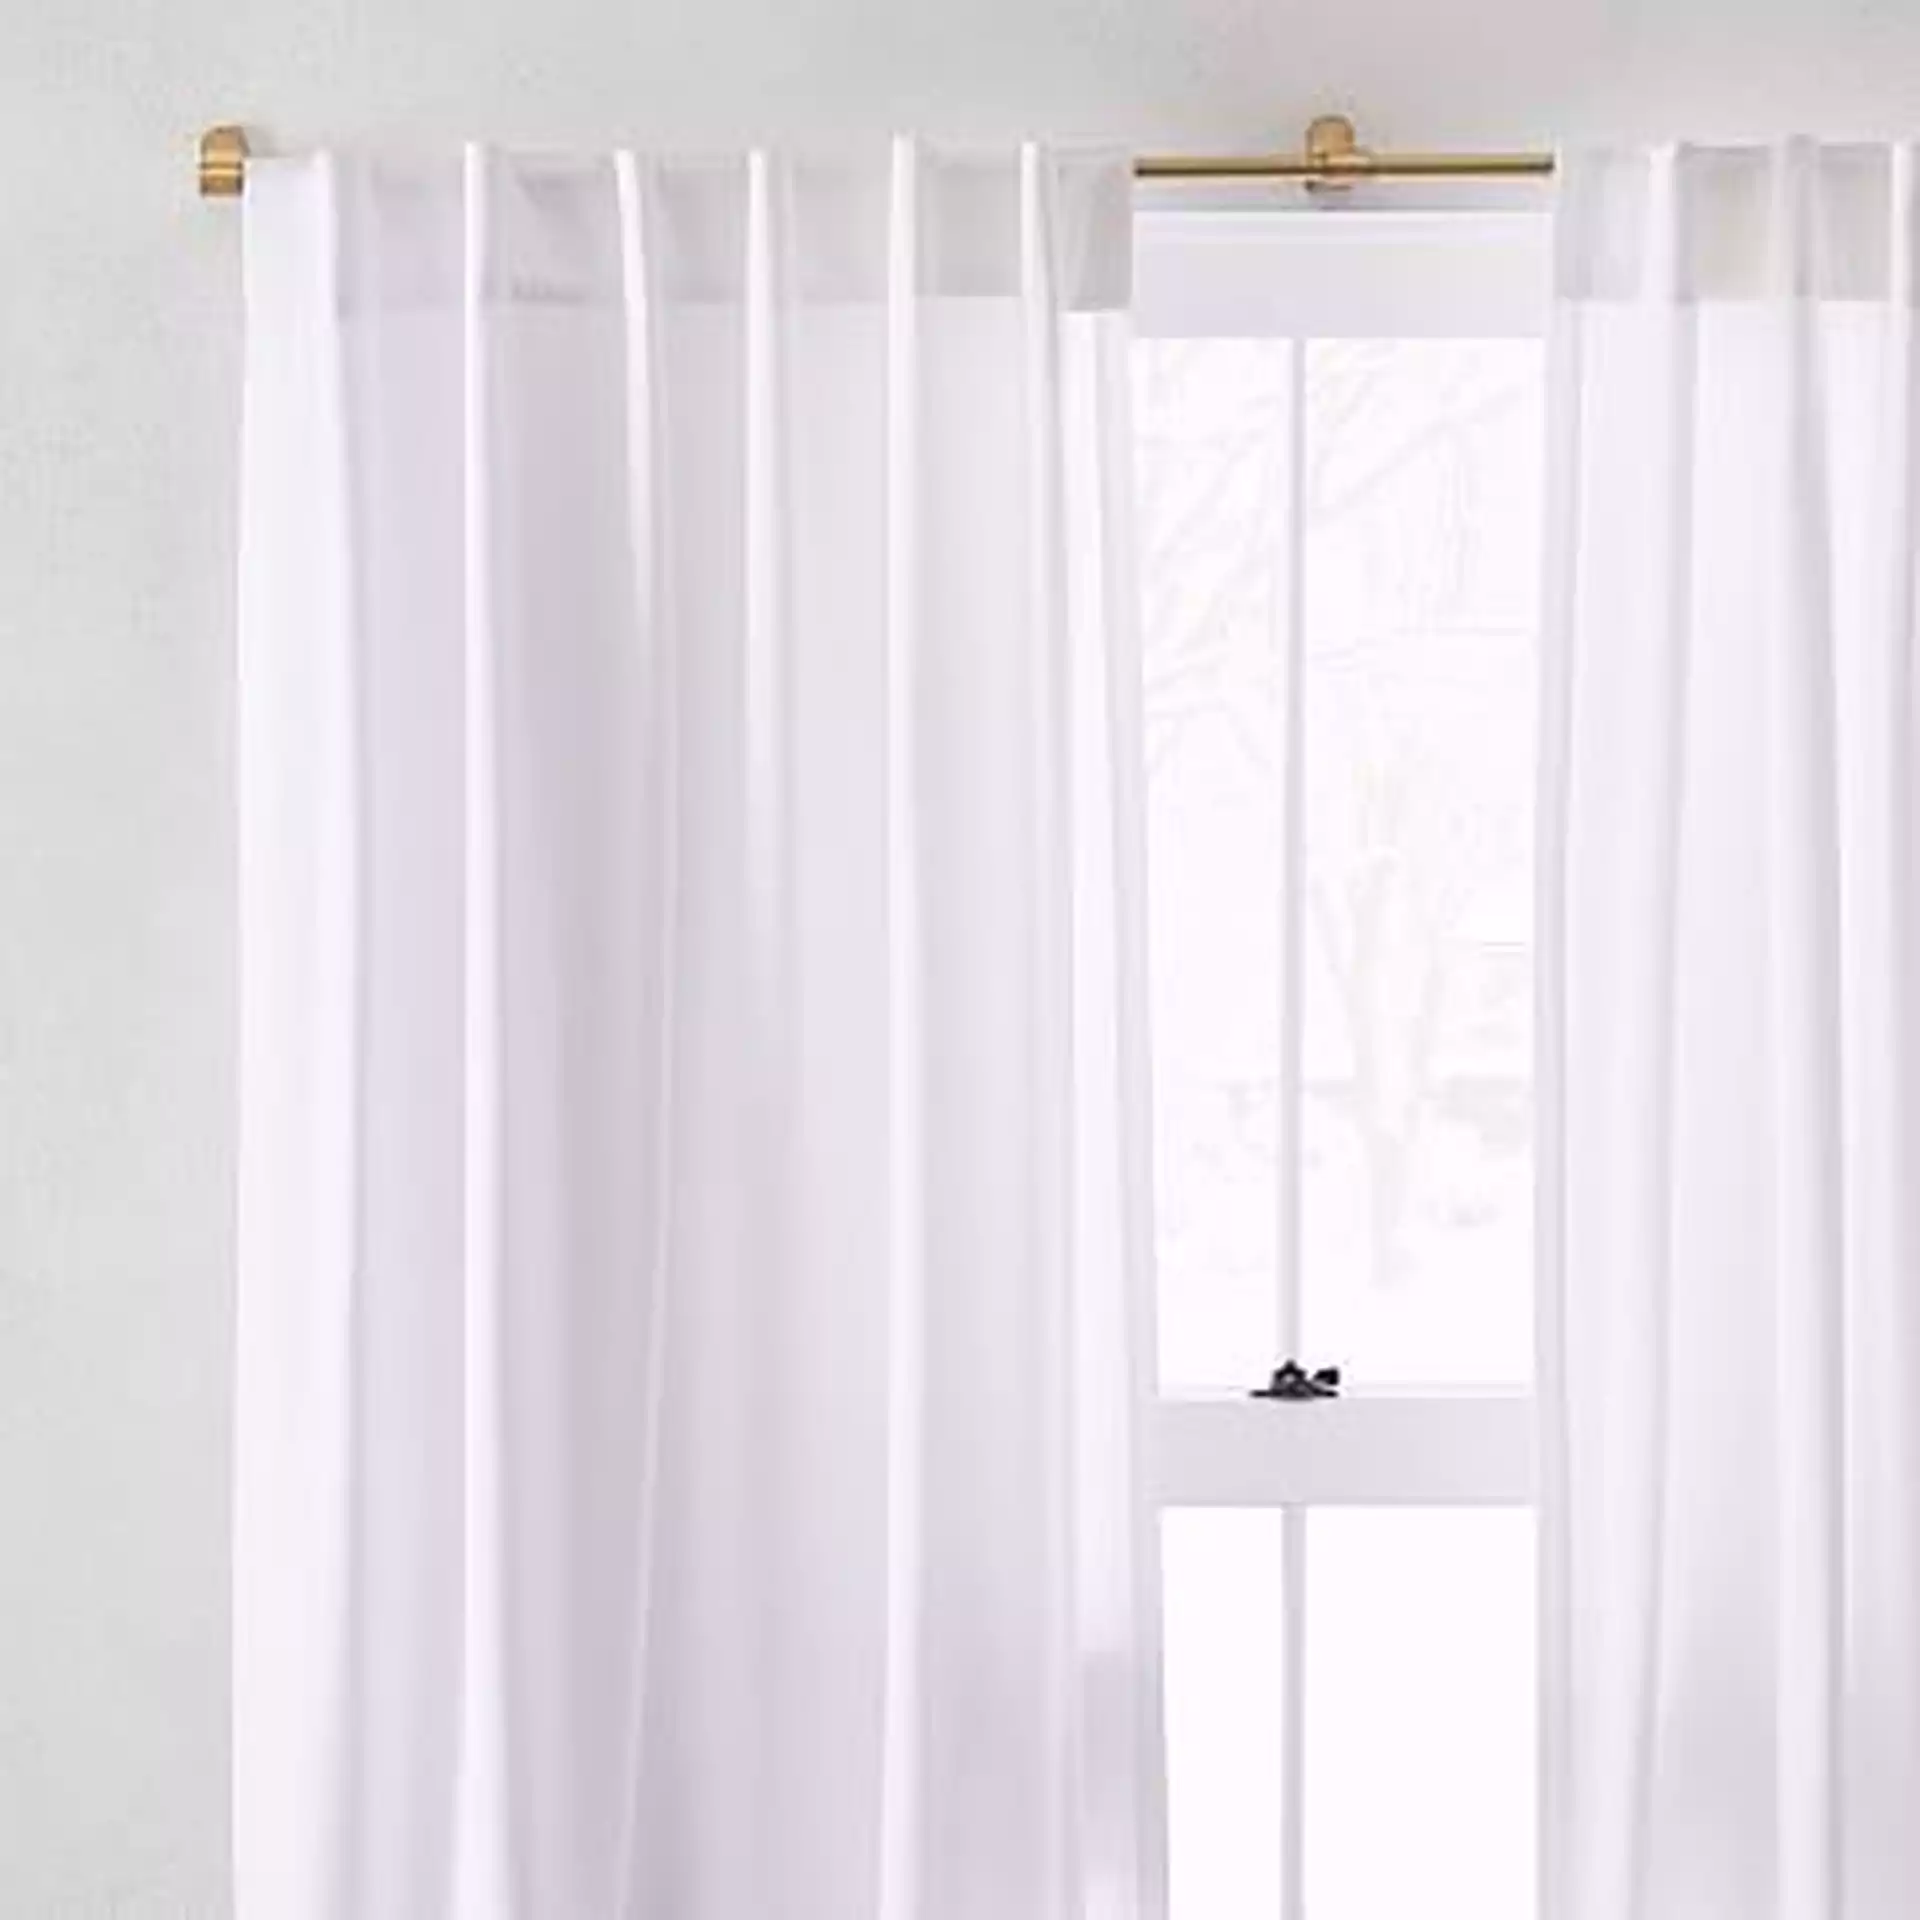 Cotton Canvas Curtain with Cotton Lining, White, 48"x84", Set of 2